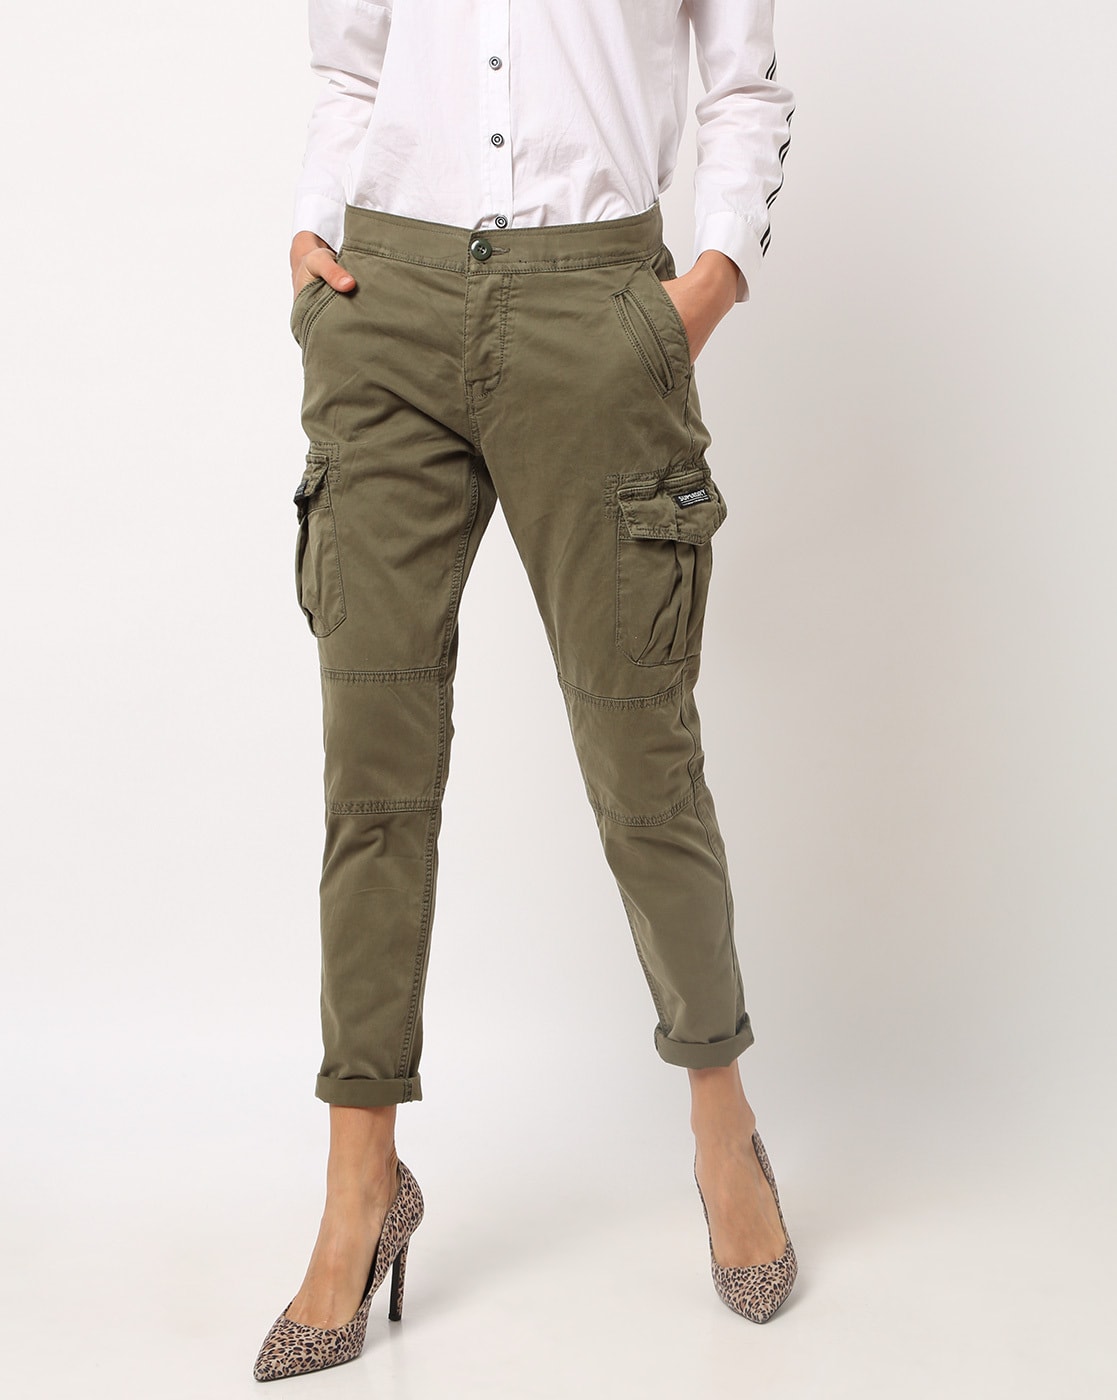 Buy Olive Green Trousers \u0026 Pants for 